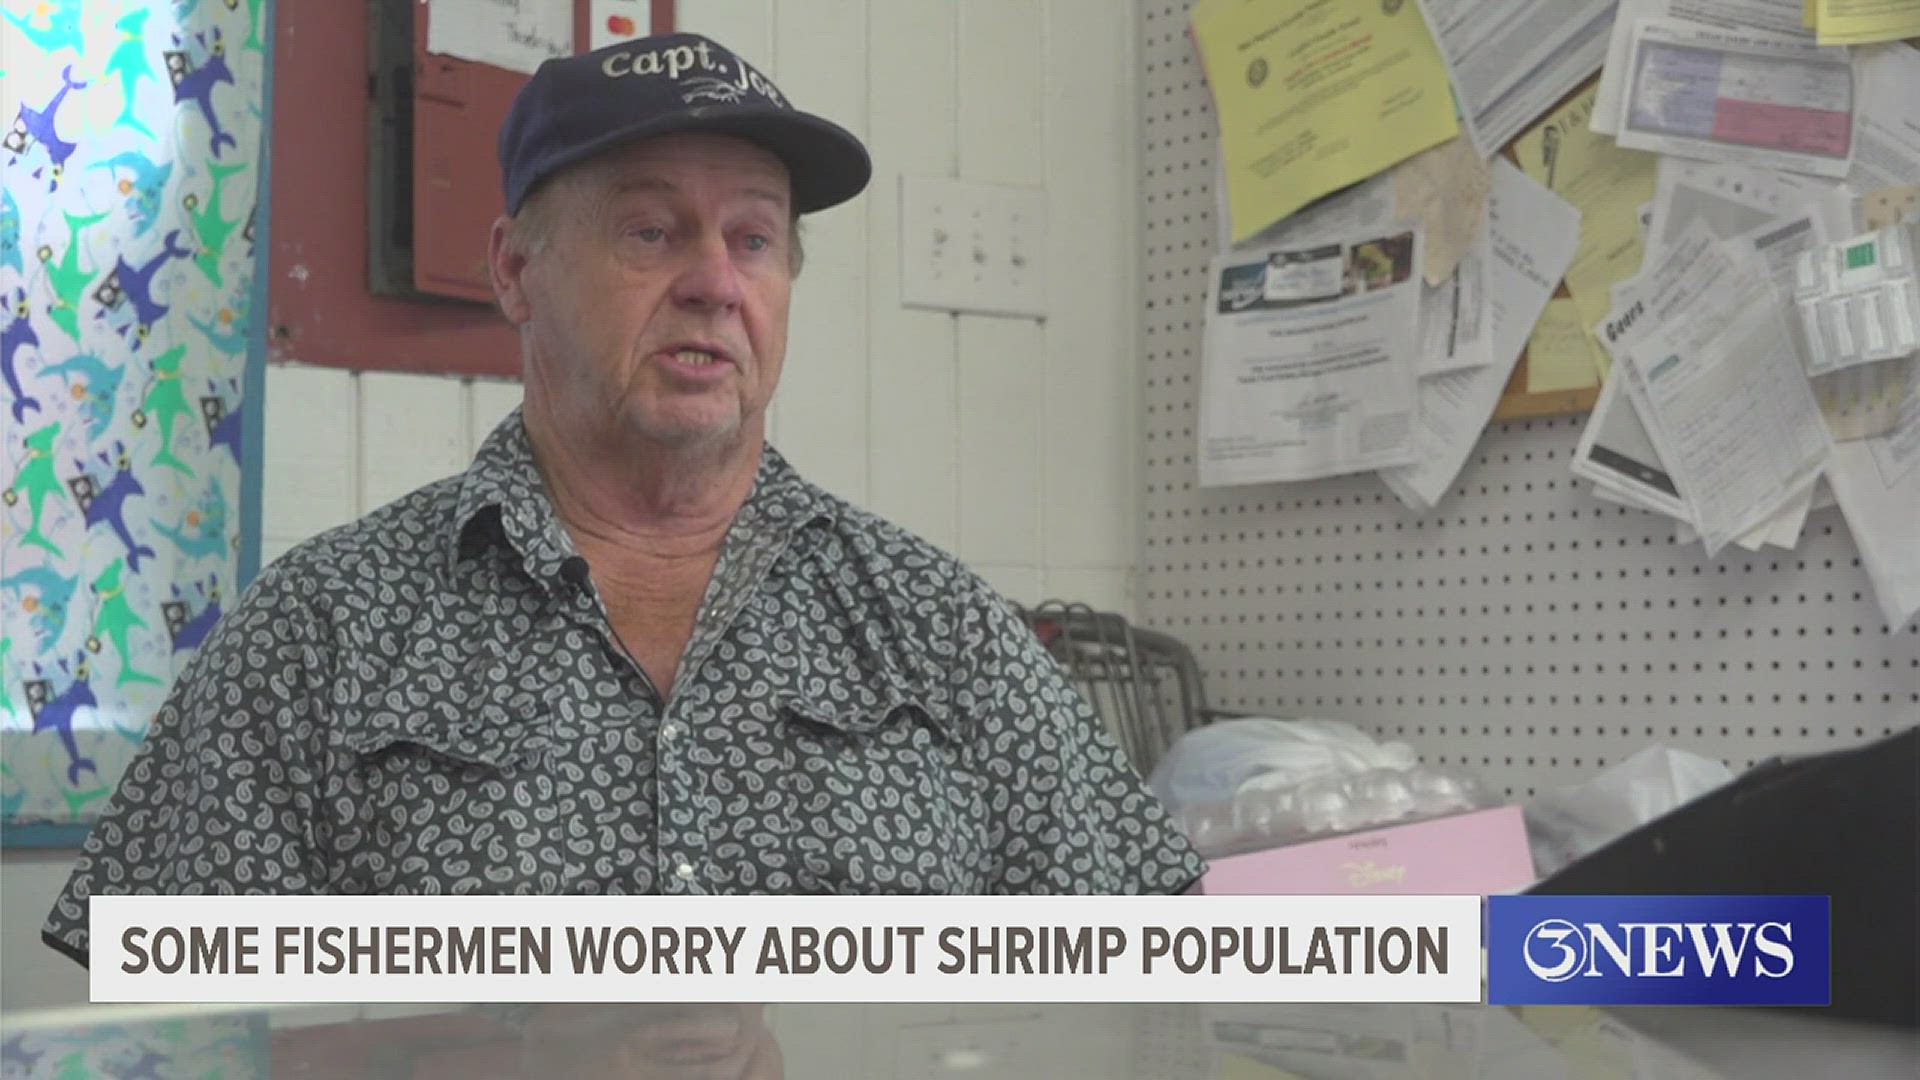 Just like real estate, one fisherman says that location plays a large factor in how shrimp move around.